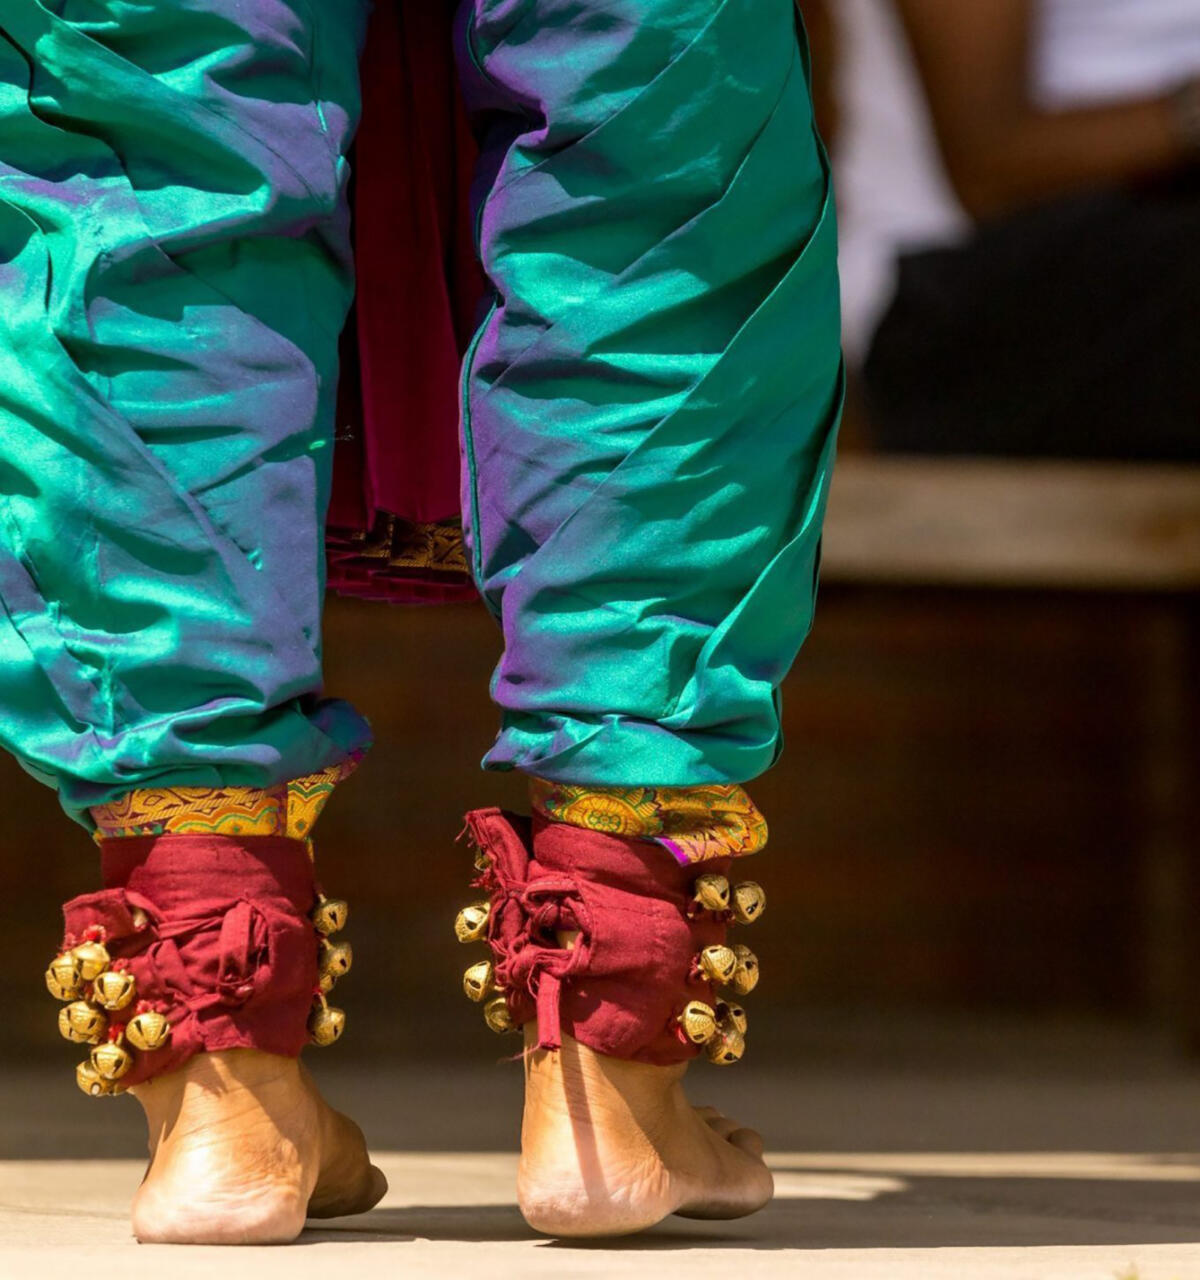 close up of the legs and feet of a South Asian dancer in colourful clothing with bells on her feet